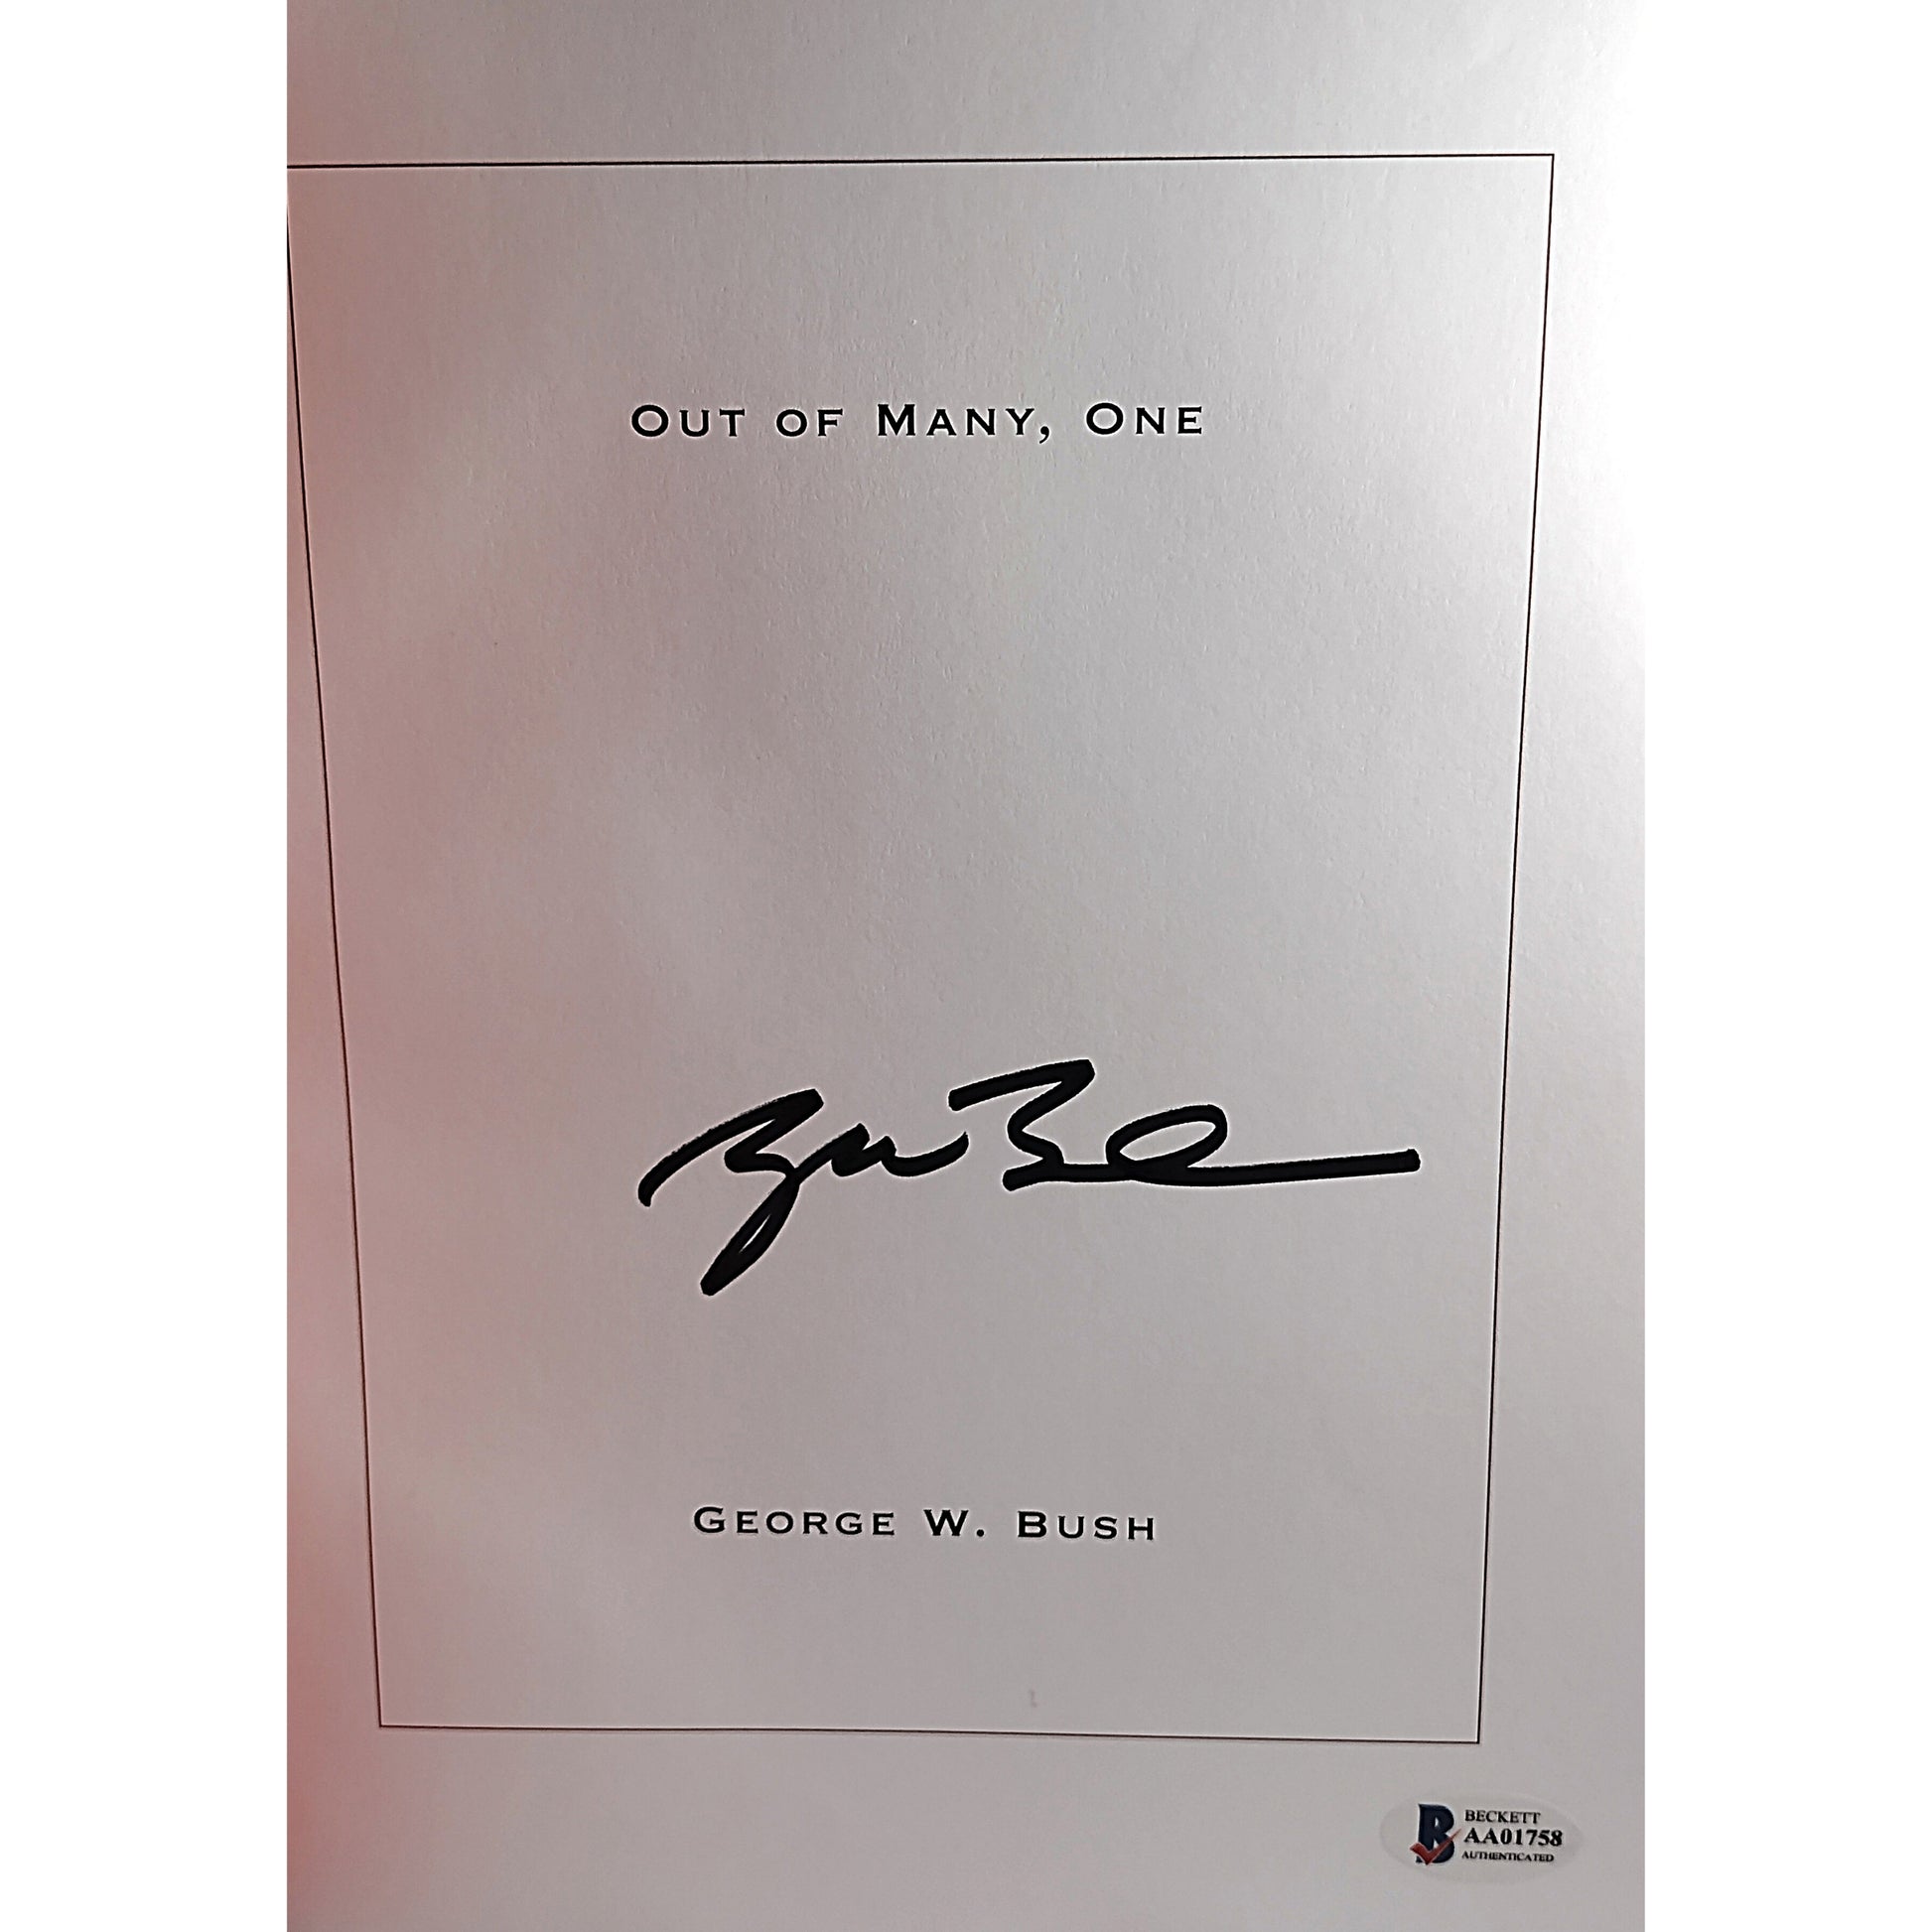 Presidential- Autographed- George W. Bush Signed Out of Many, One Hardcover 1st Edition Book Beckett BAS Authentication 103